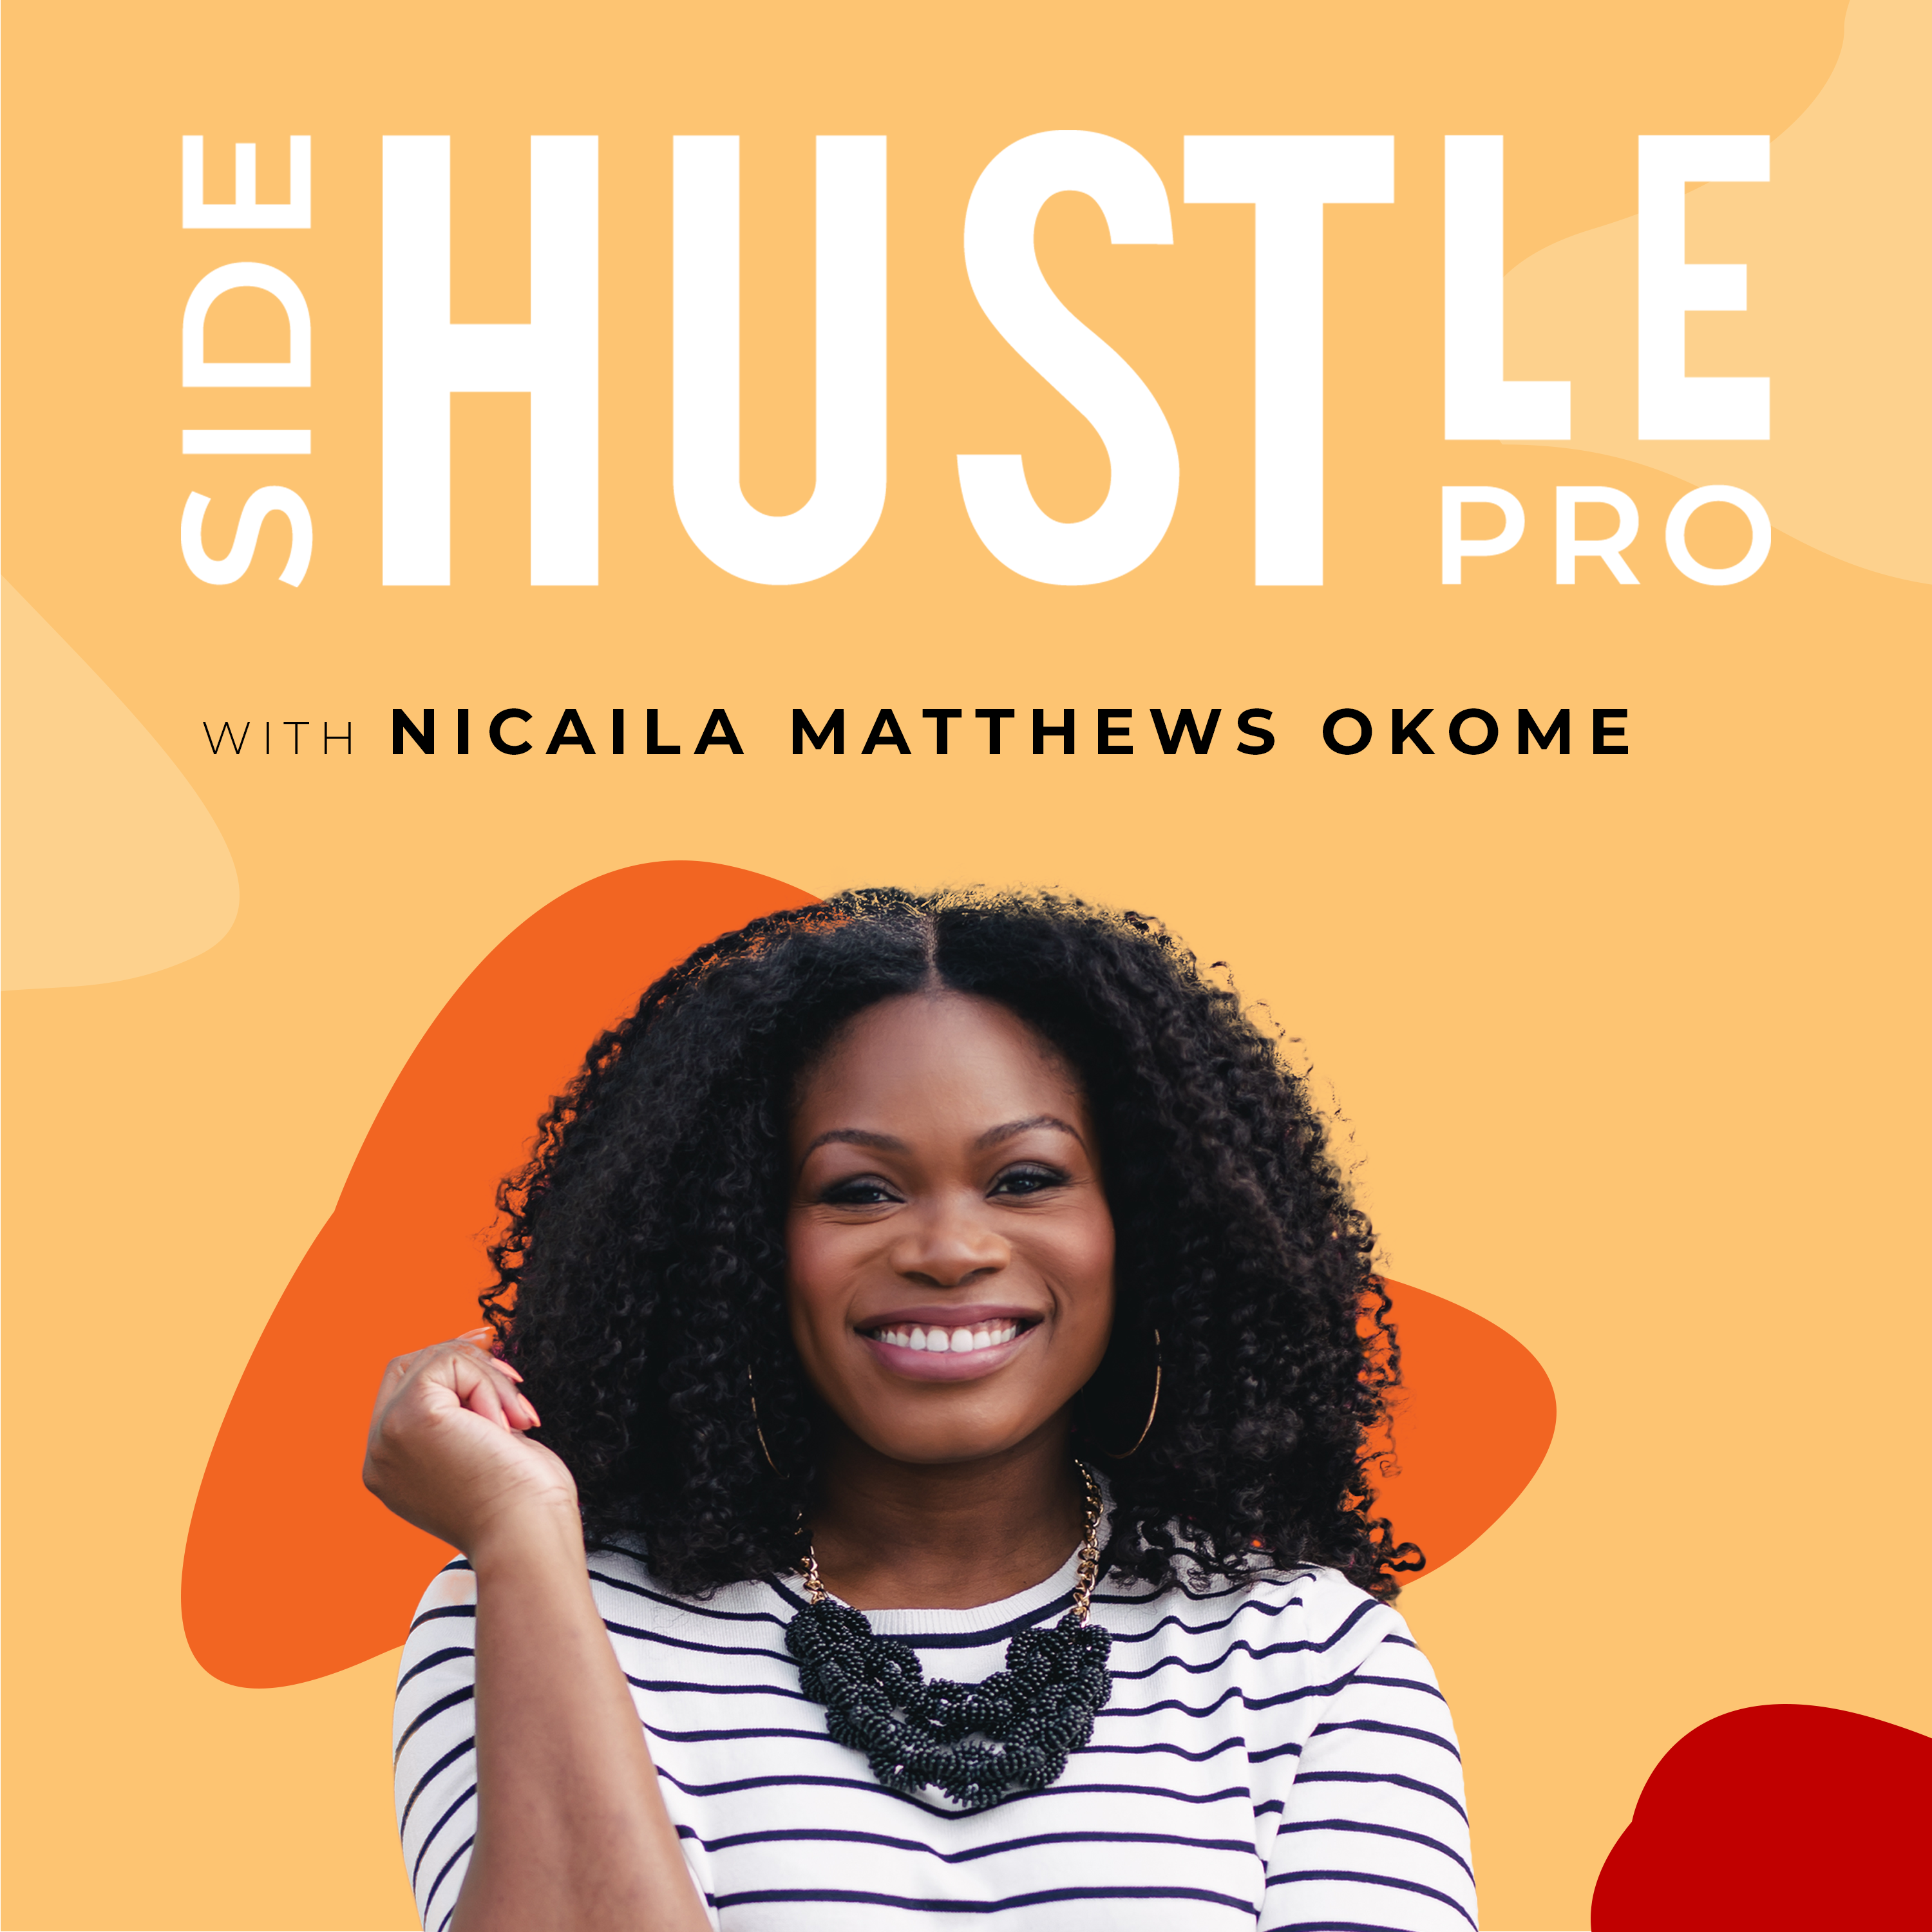 343: From Wall Street Analyst to the Founder of HBCU Prep School